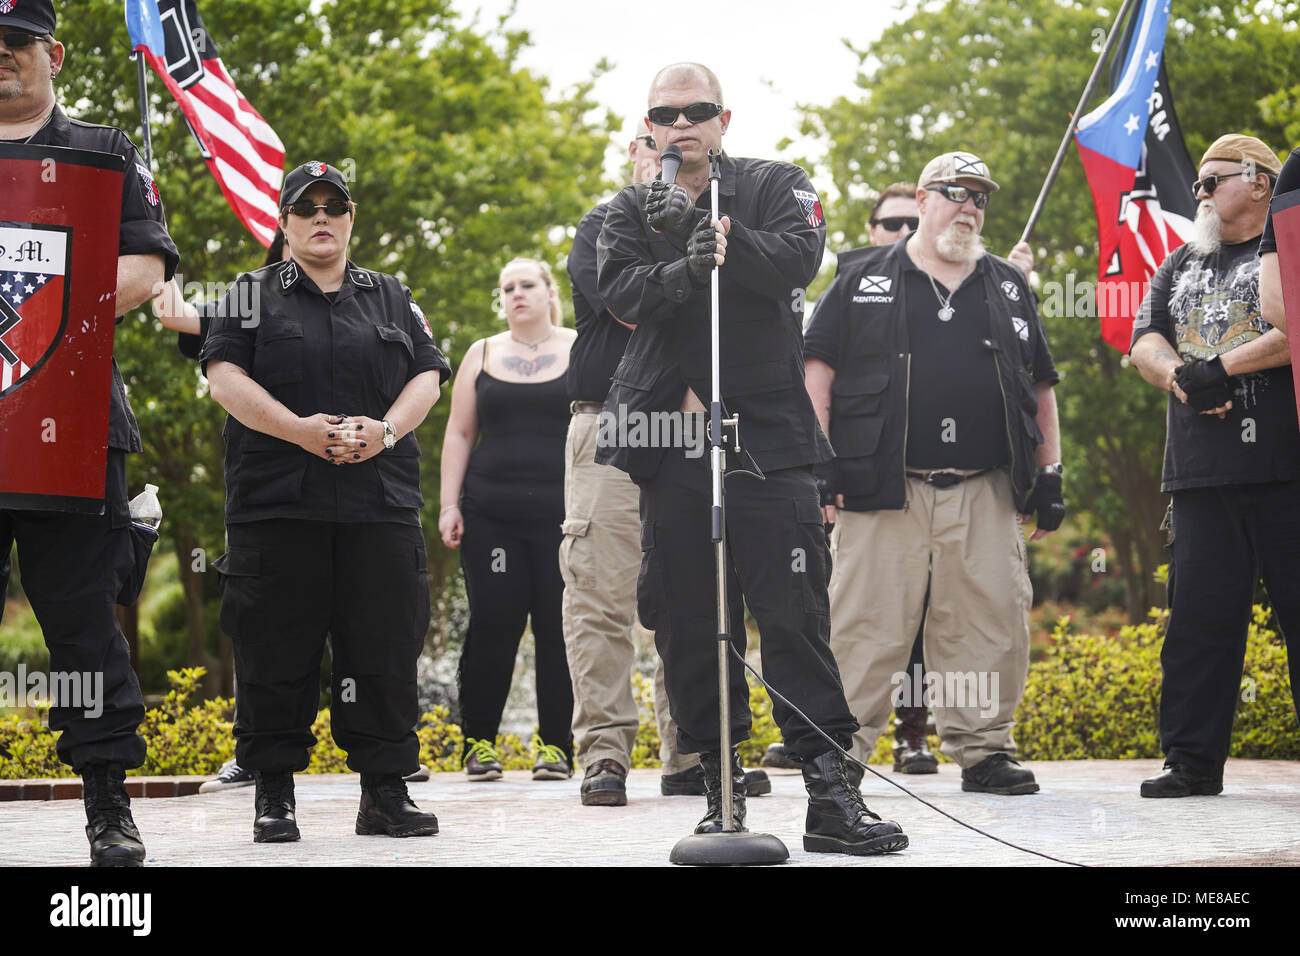 Newnan, Georgia, USA. 21st Apr, 2018. White Supremacist Members of National Socialist Movement gathered in Greenville Street Park for a rally in town of Newnan, GA on Saturday April 21, 2018.4/21/2018.Newnan, Georgia.Go Nakamura/Zuma Wire Credit: Go Nakamura/ZUMA Wire/Alamy Live News Stock Photo